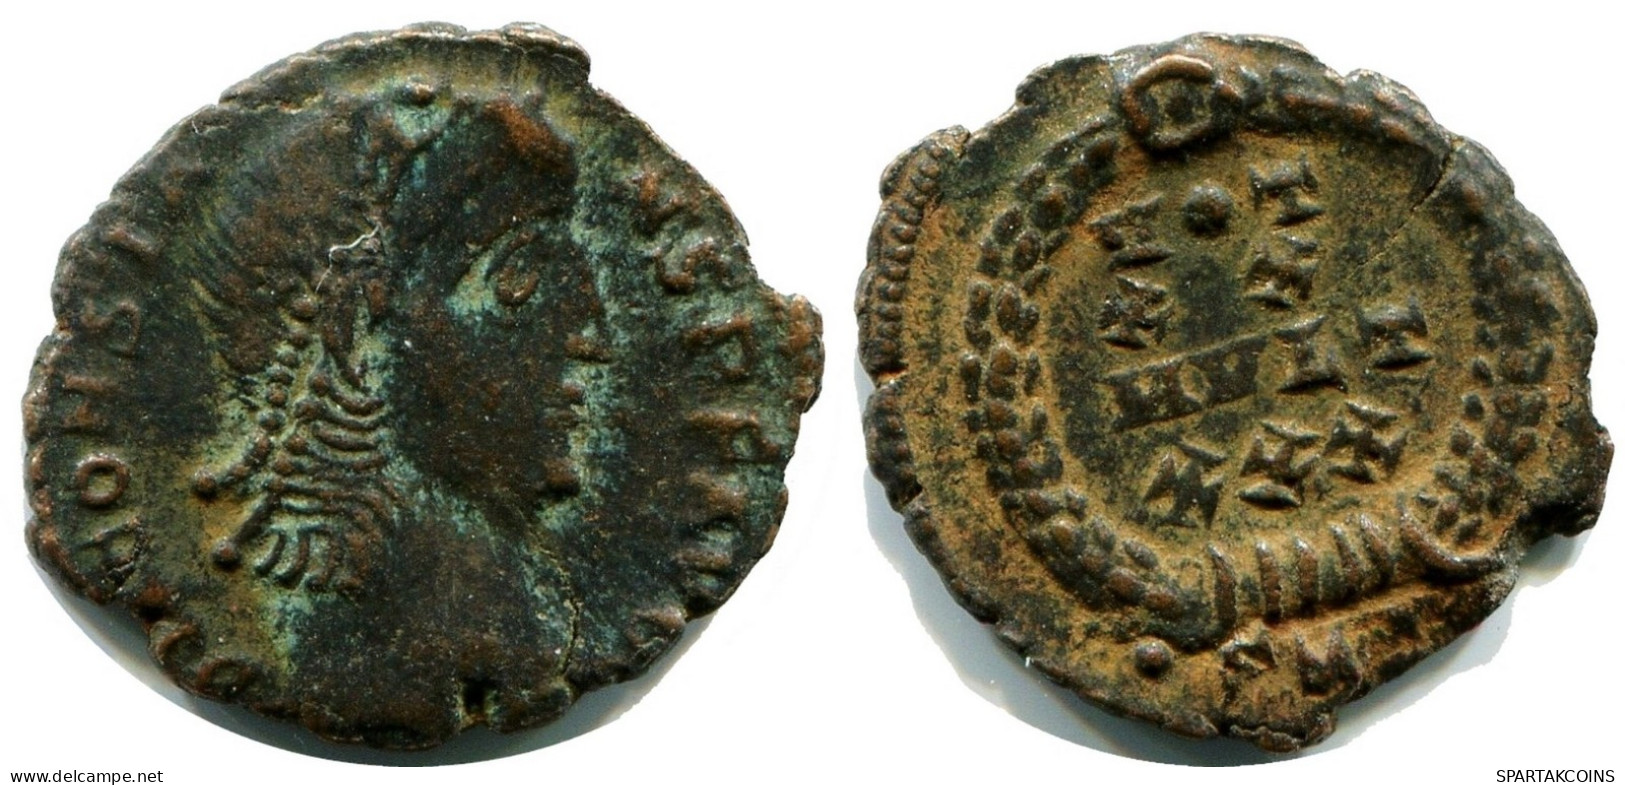 CONSTANS MINTED IN NICOMEDIA FROM THE ROYAL ONTARIO MUSEUM #ANC11751.14.F.A - El Impero Christiano (307 / 363)